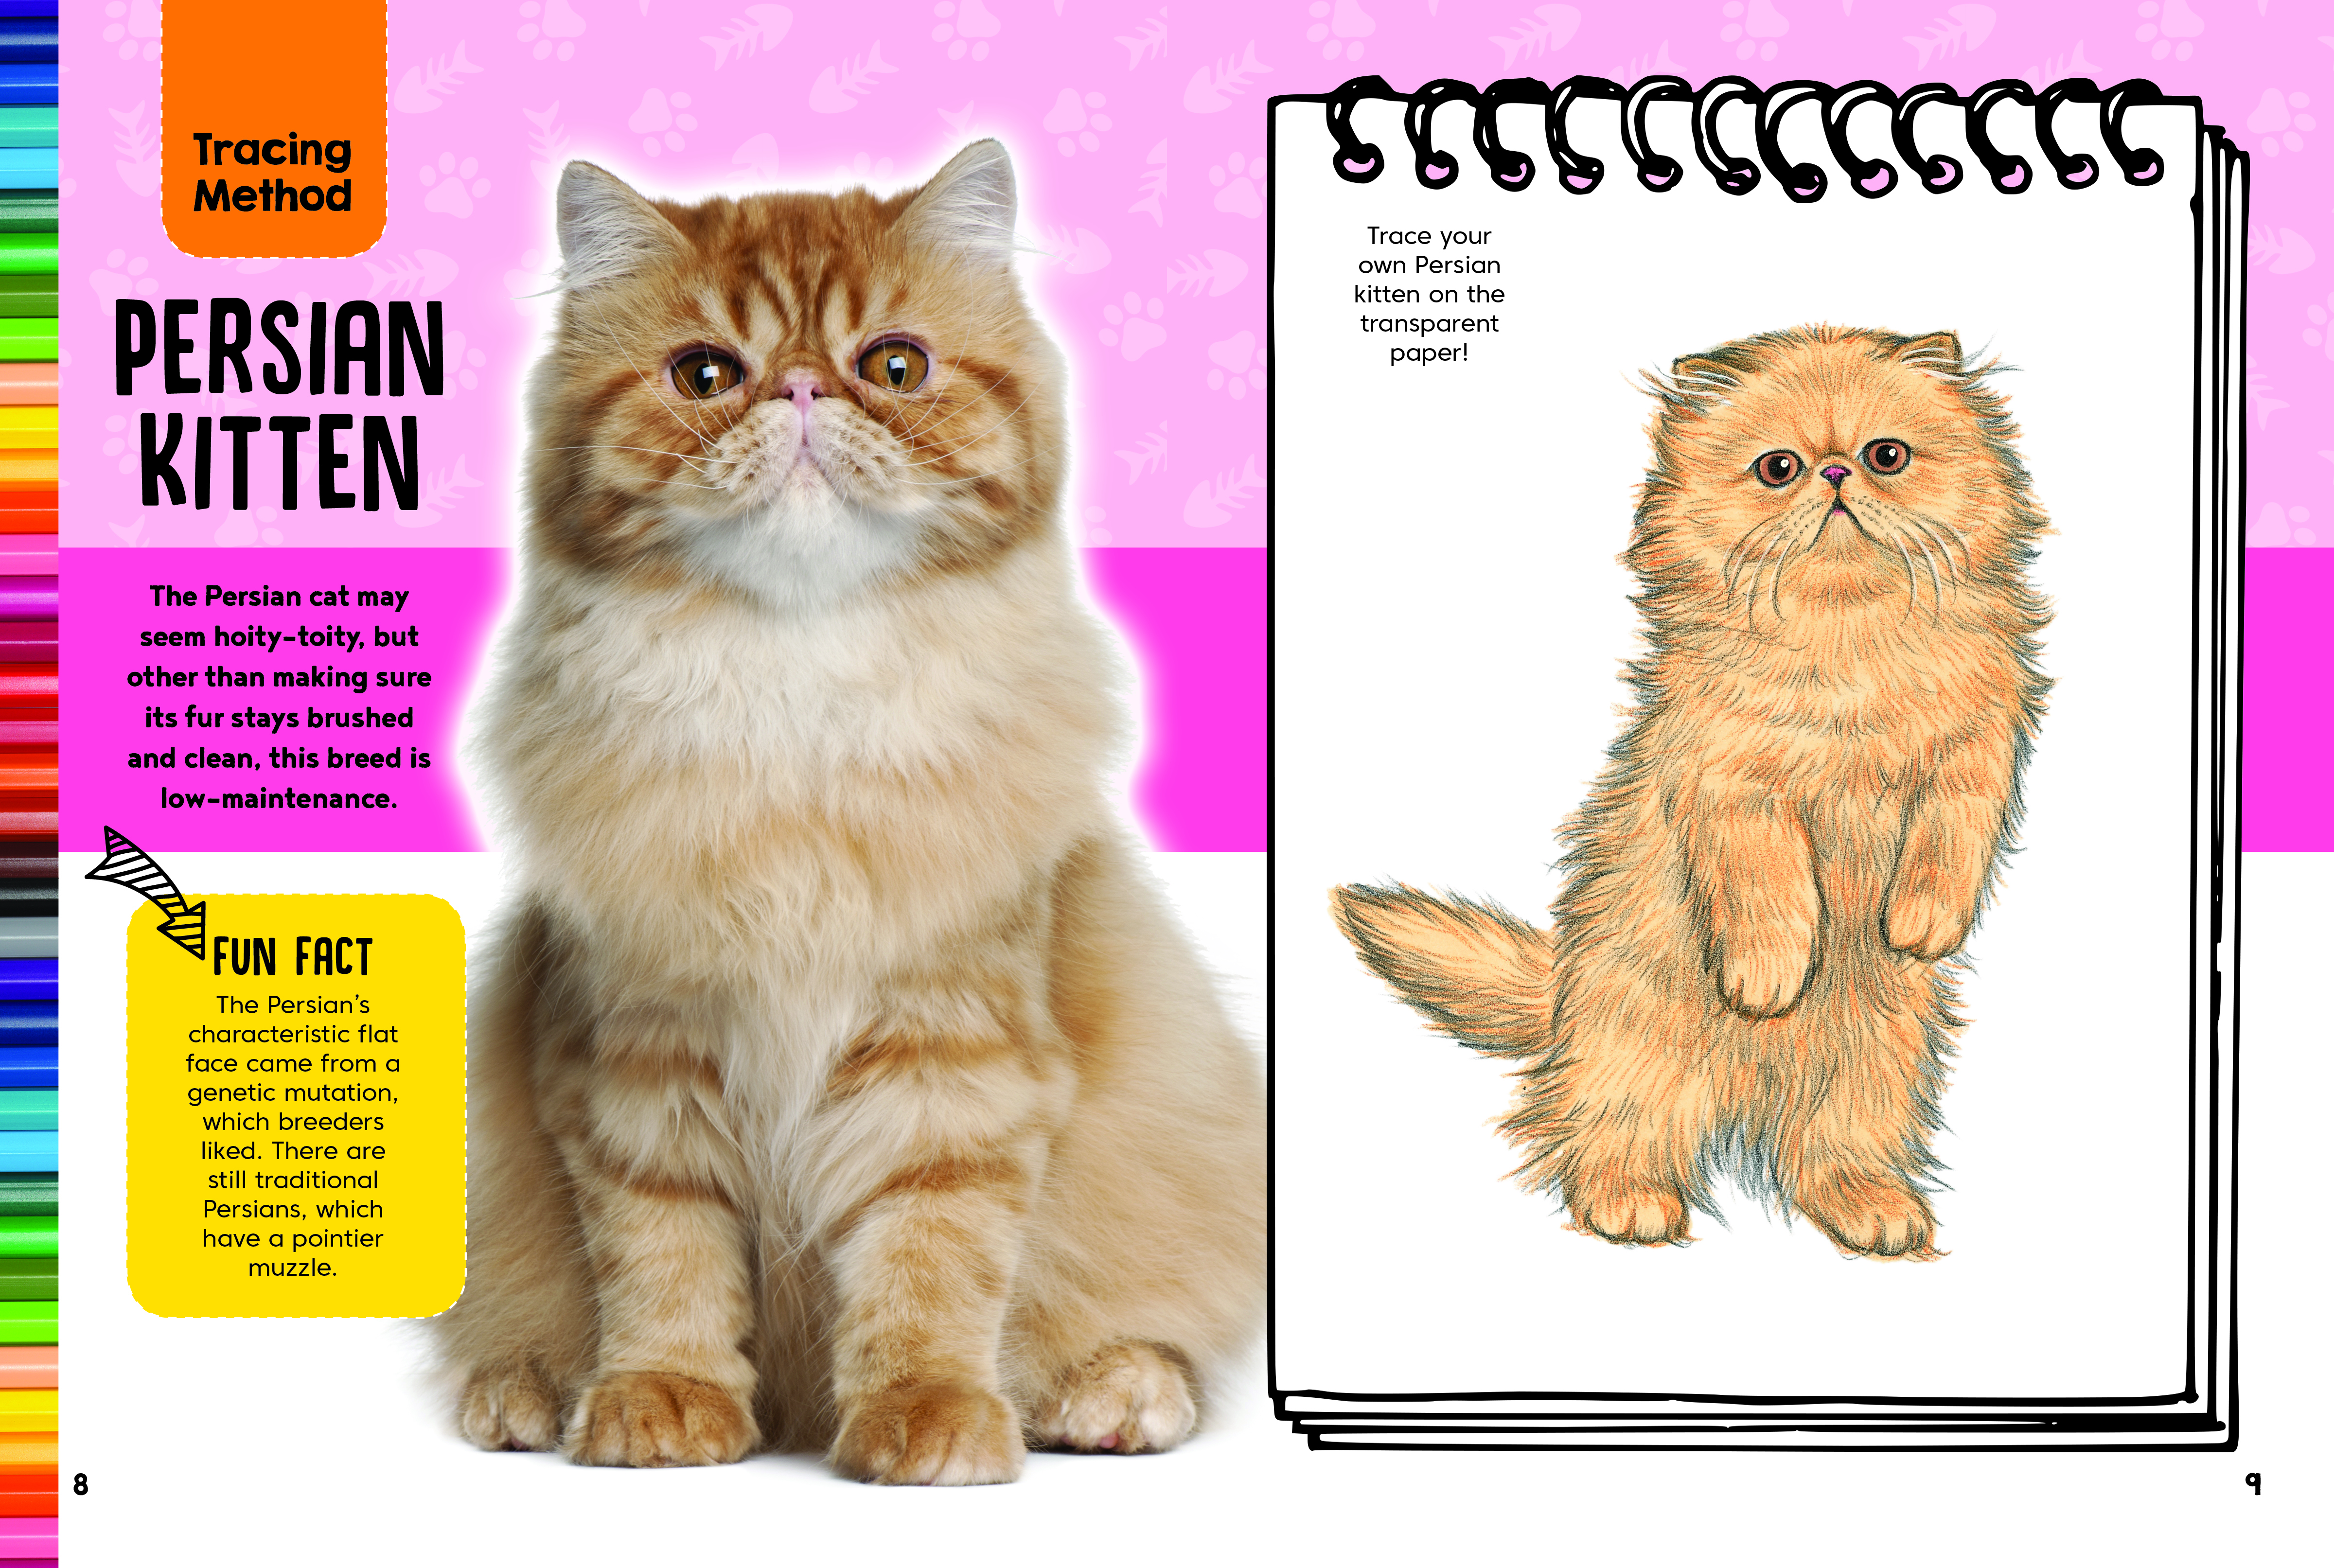 Cats & Kittens Drawing & Activity Book